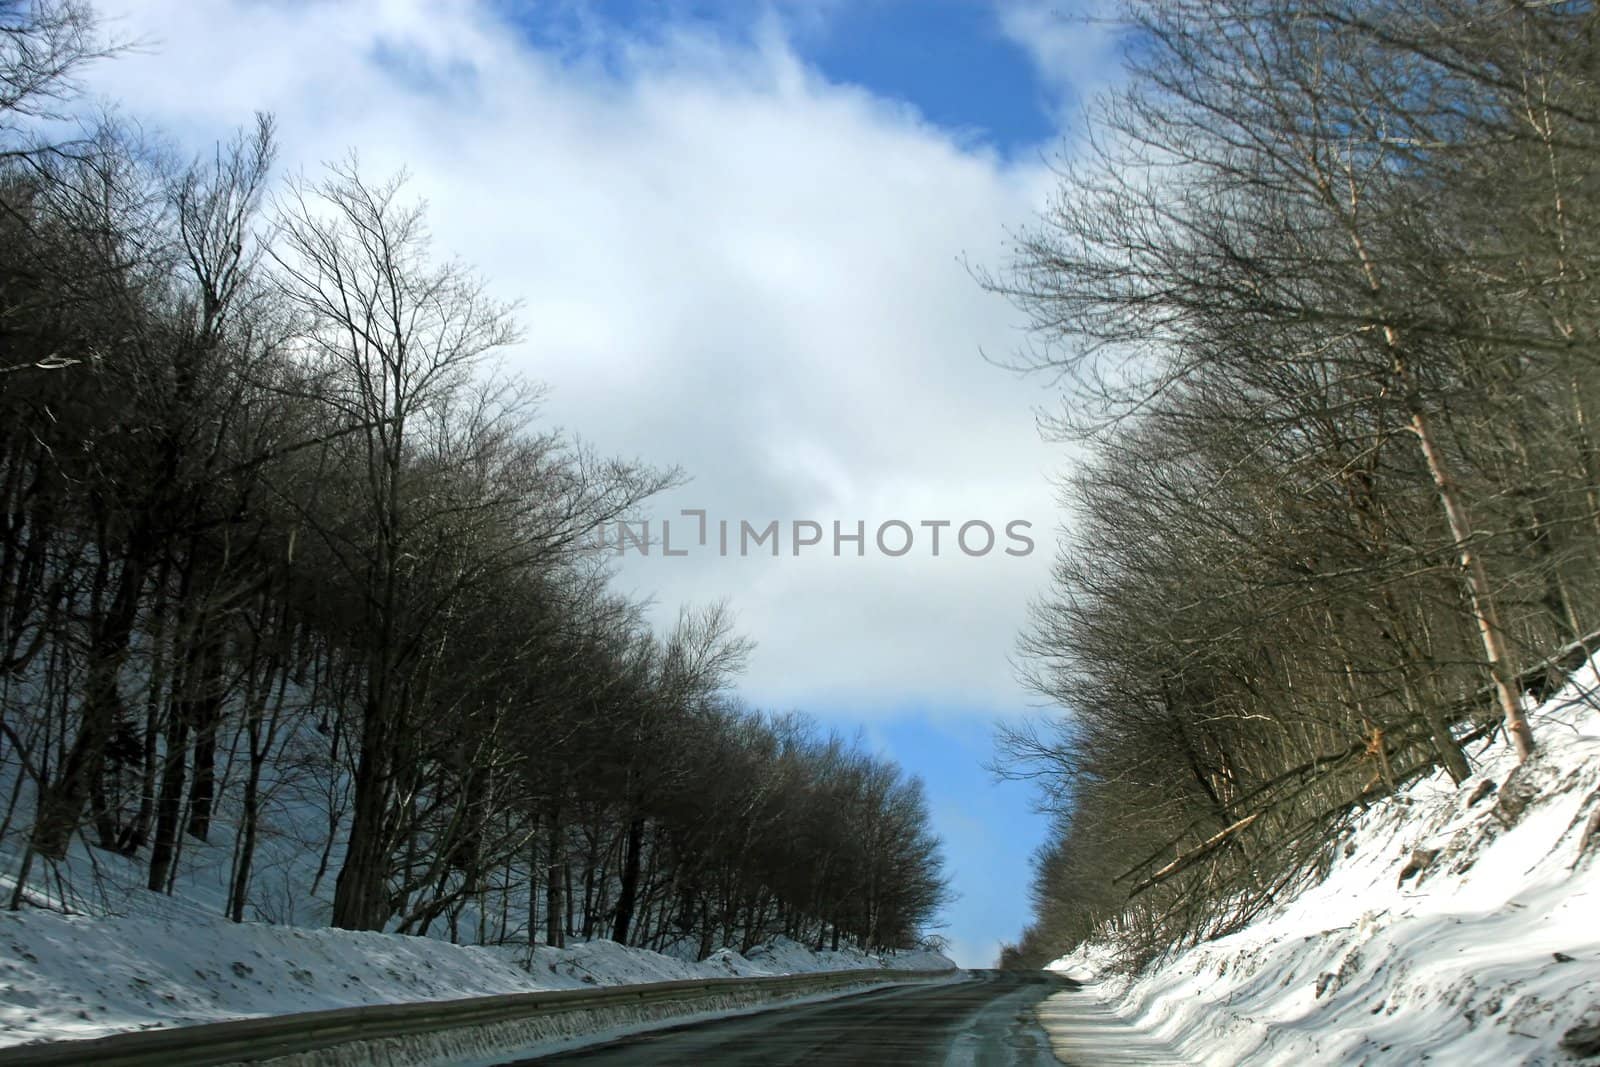 A road in winter with trees and snow to the sides